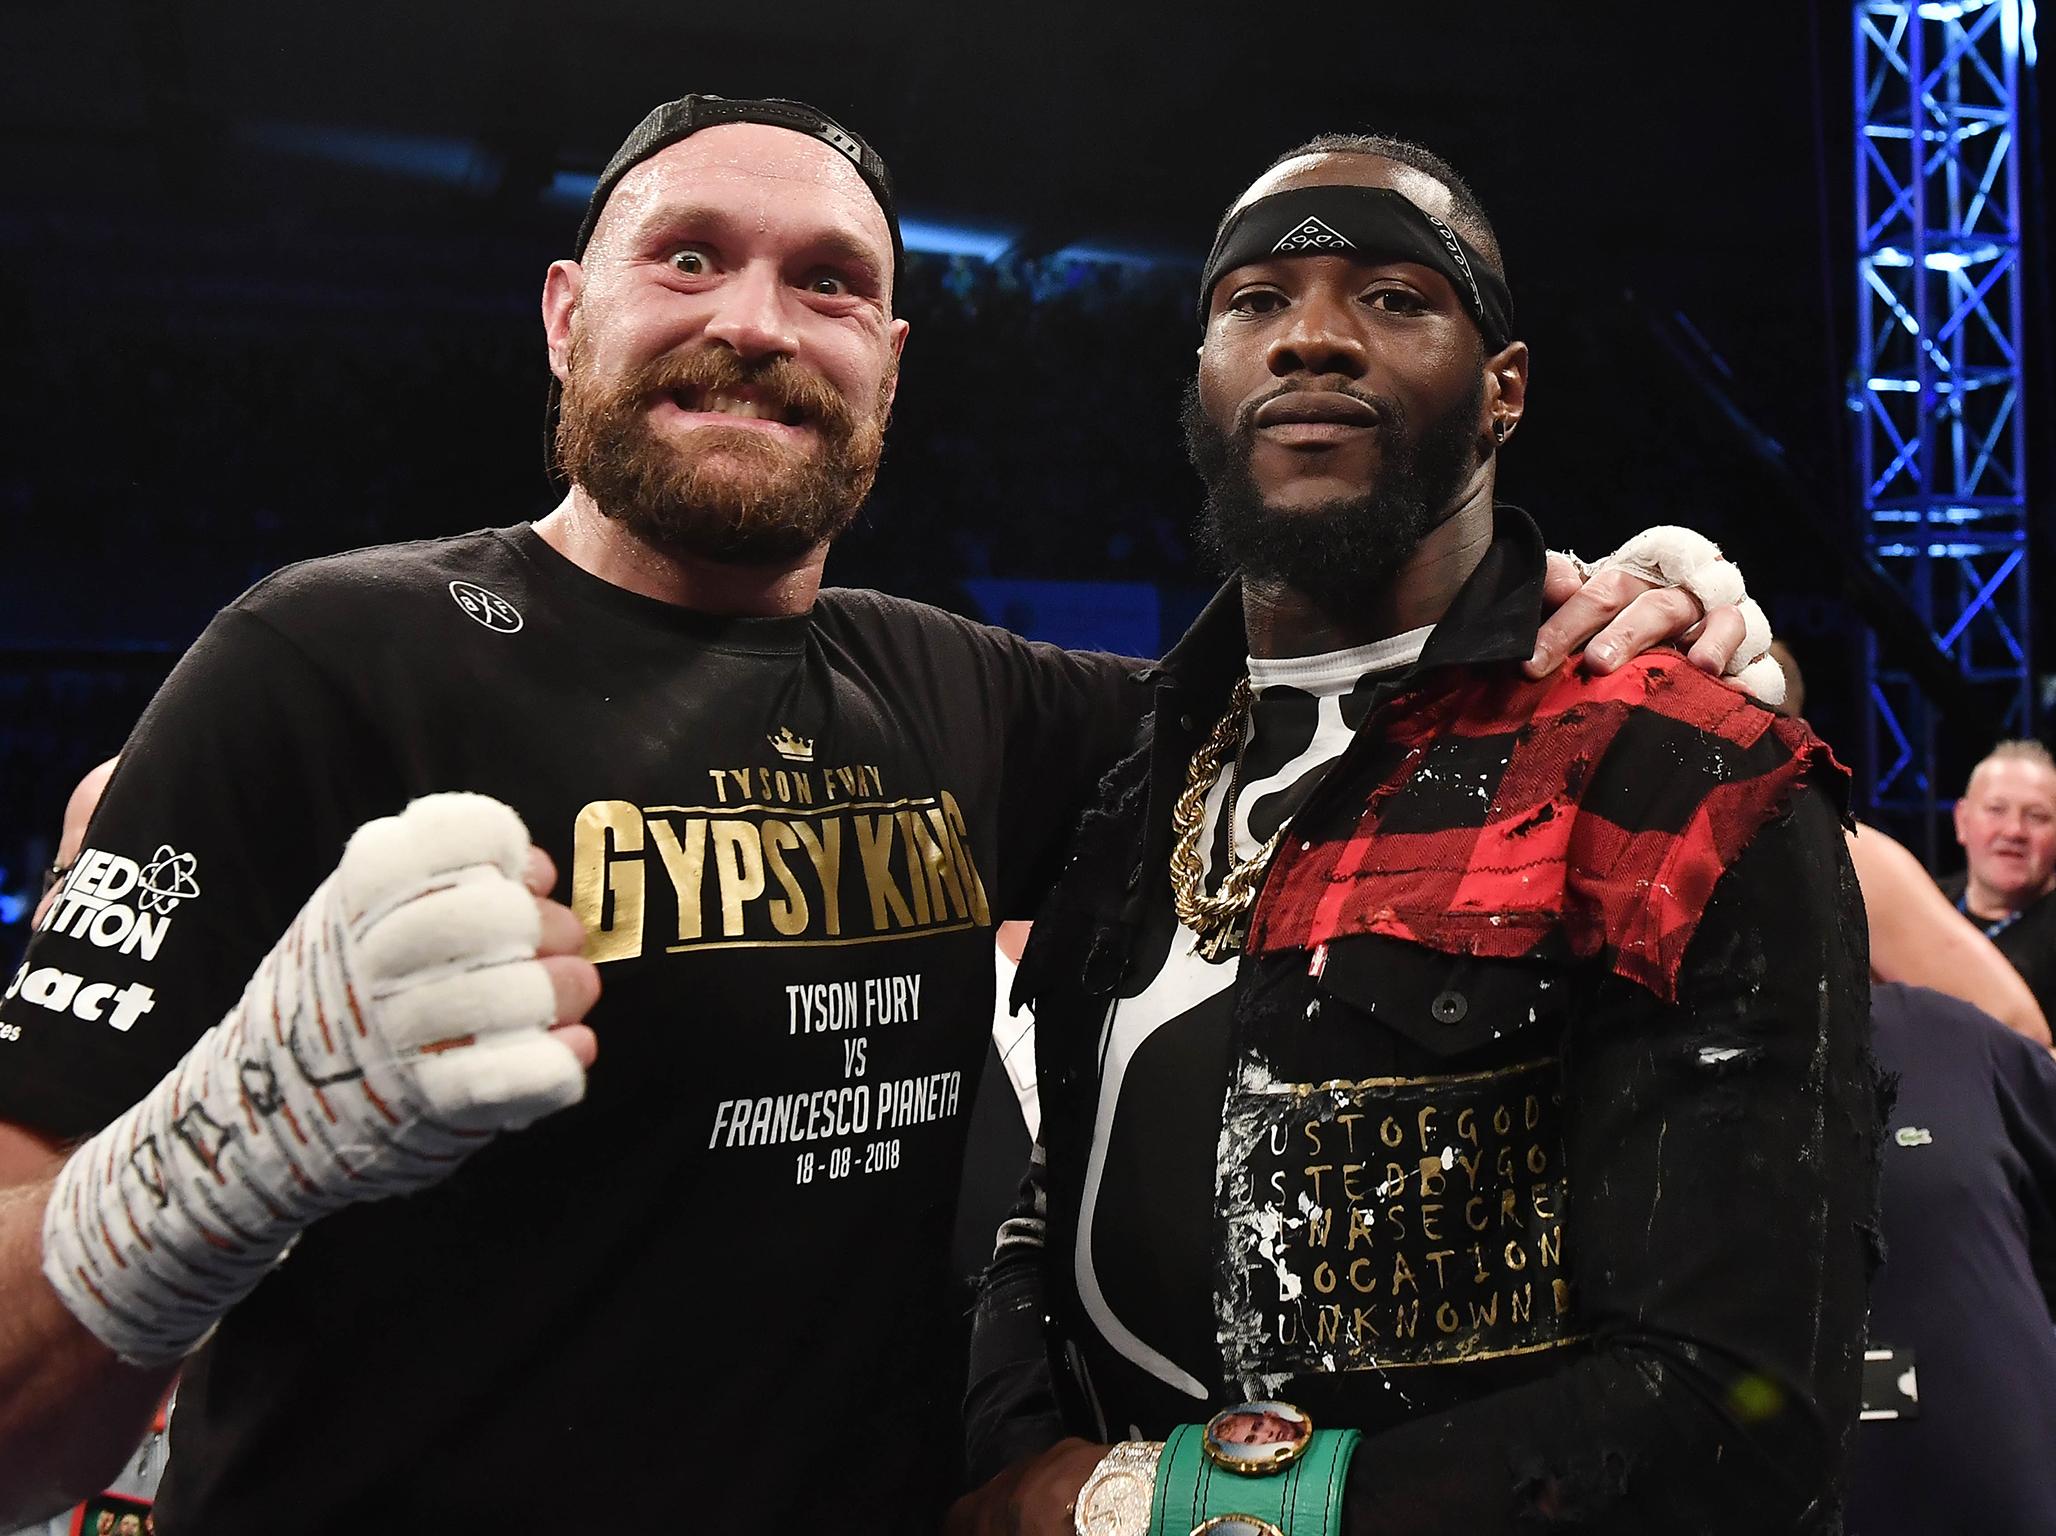 Tyson Fury vs Deontay Wilder Fight made available to watch via live stream through app for the first time The Independent The Independent